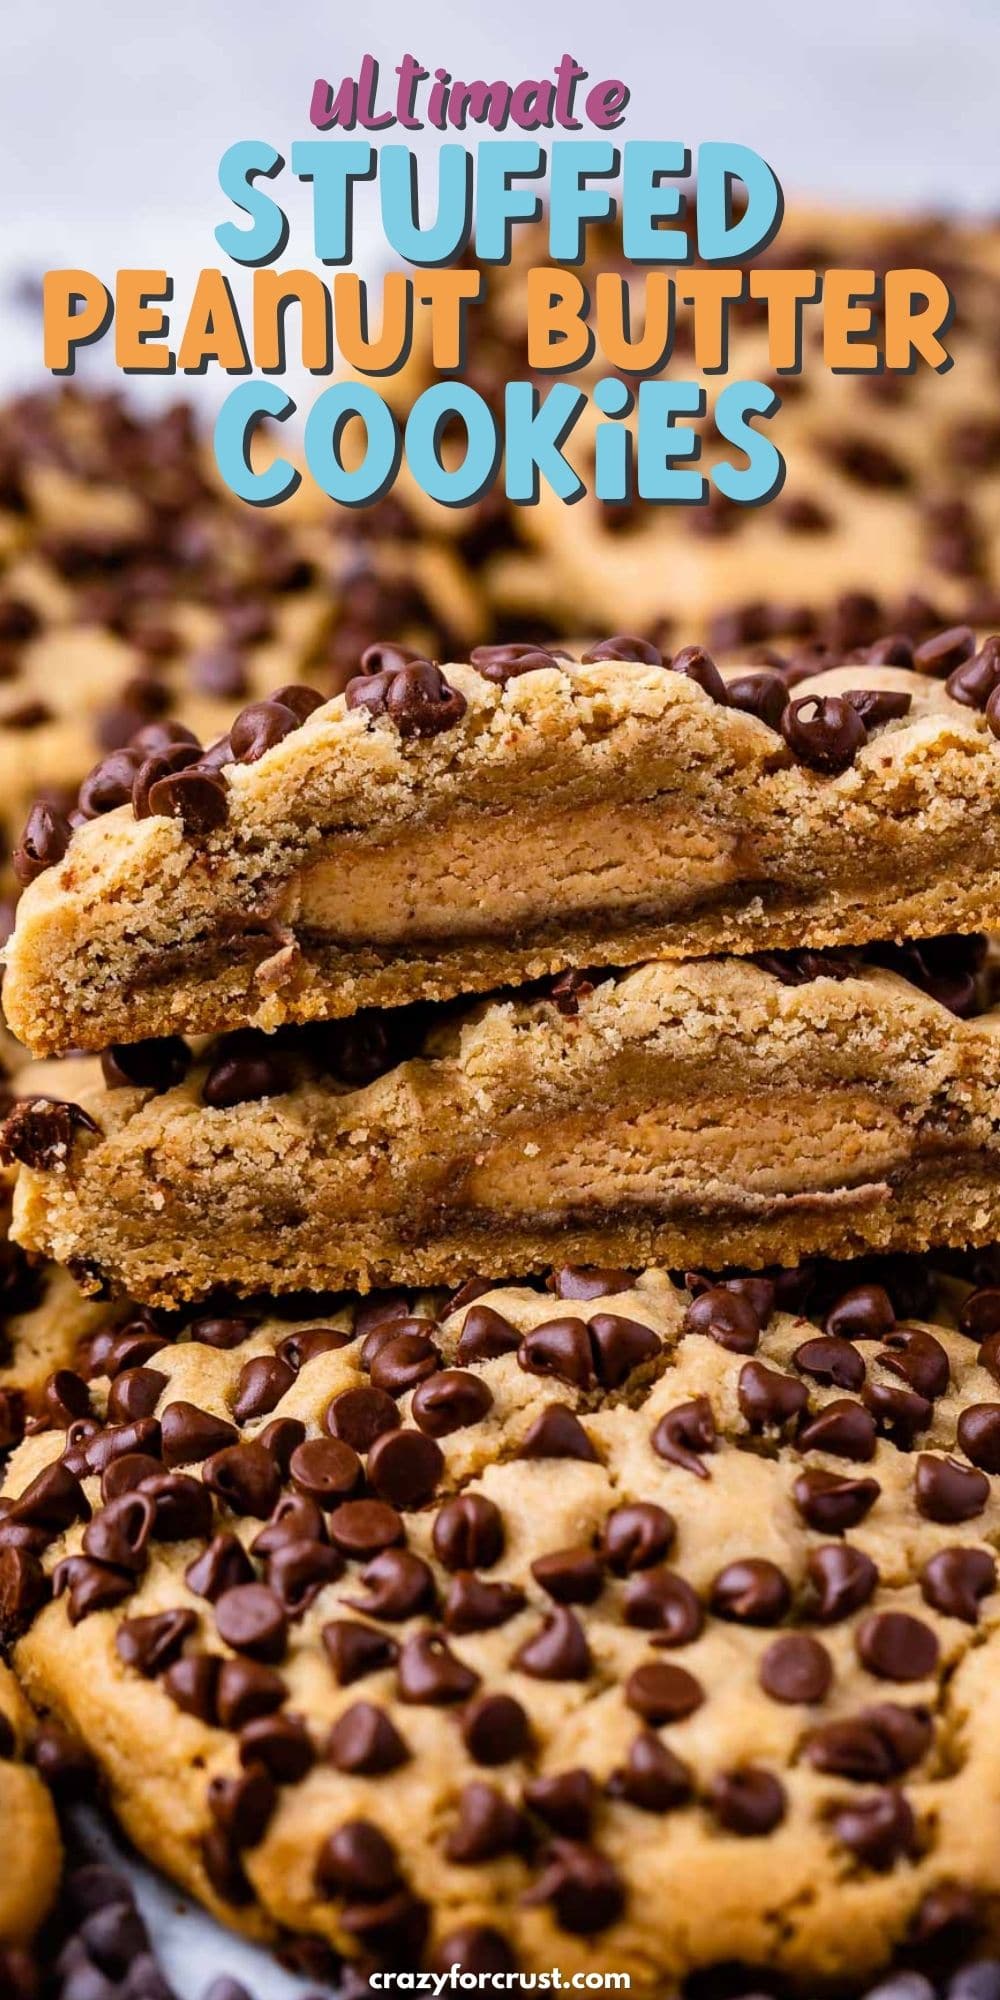 STACK OF 2 HALVES OF A PEANUT BUTTER COOKIE STUFFED WITH A PEANUT BUTTER CUP.